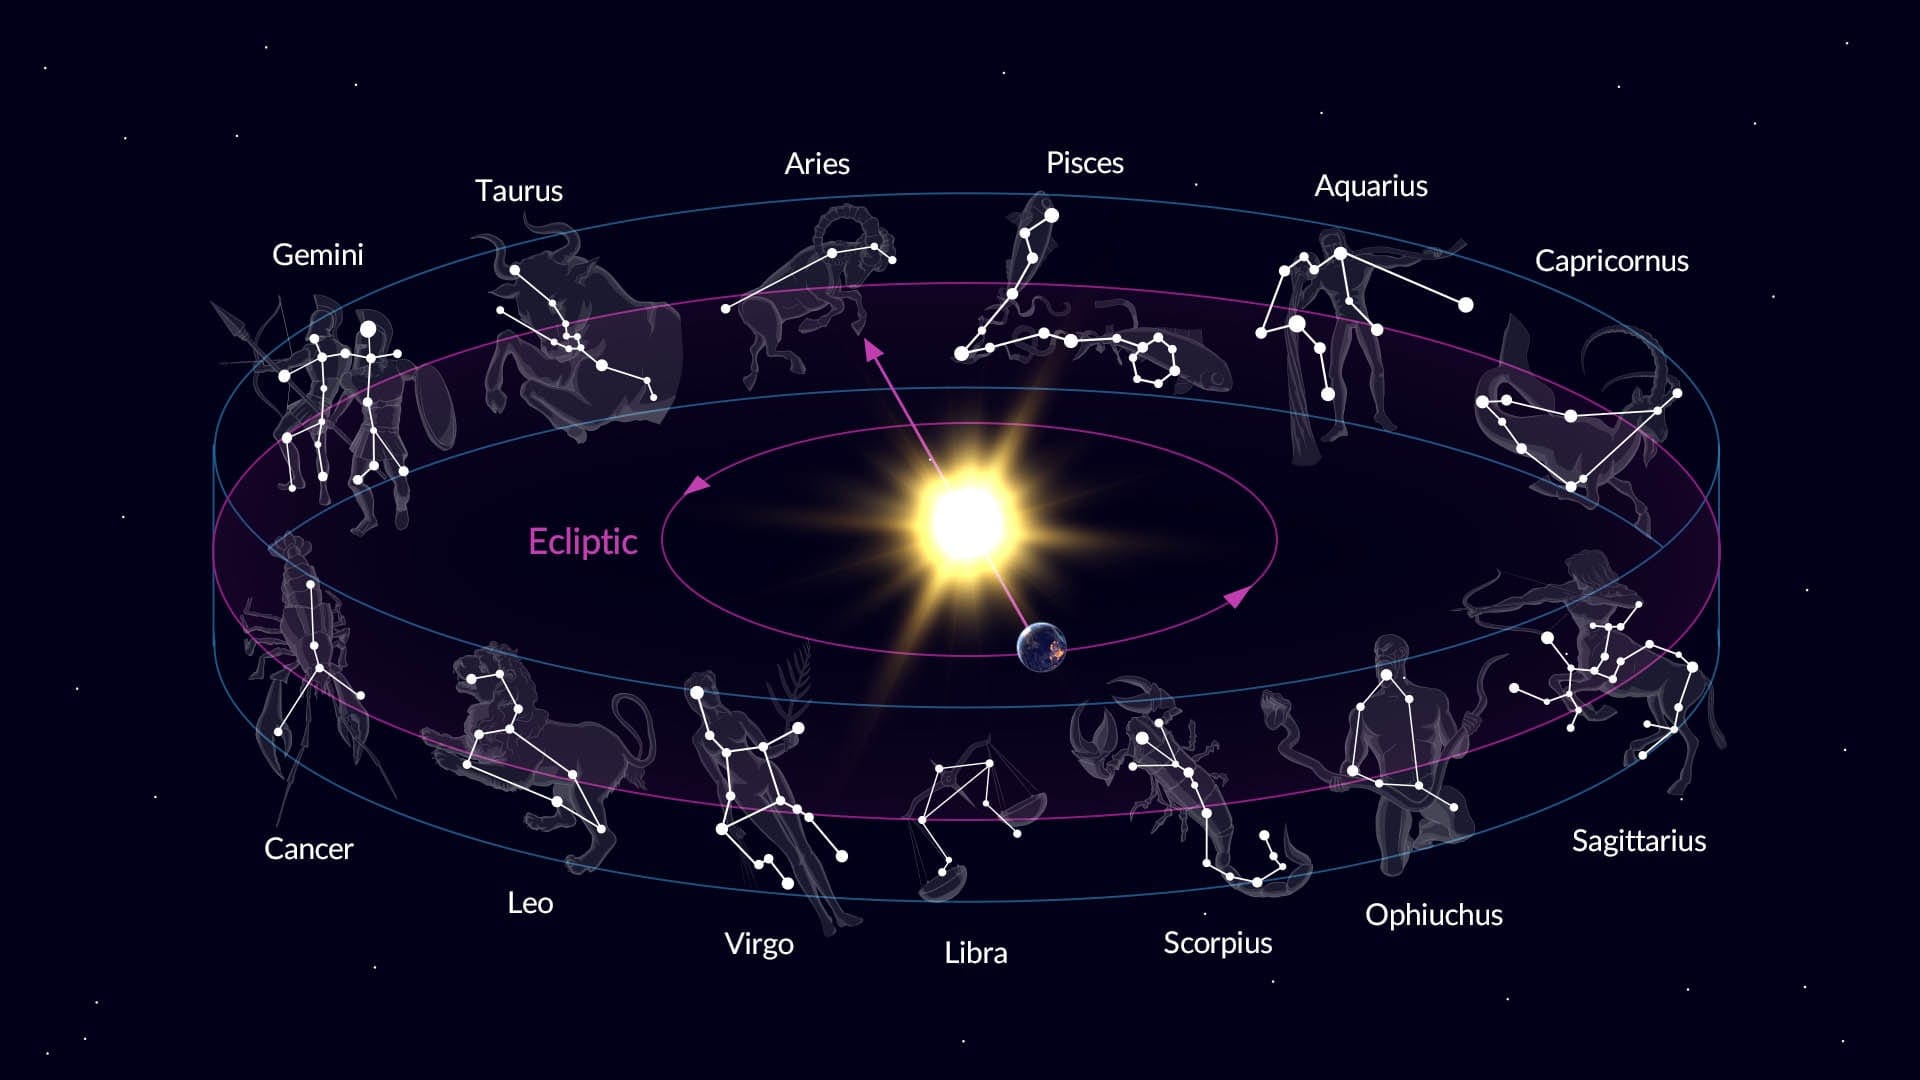 The ecliptic constellations